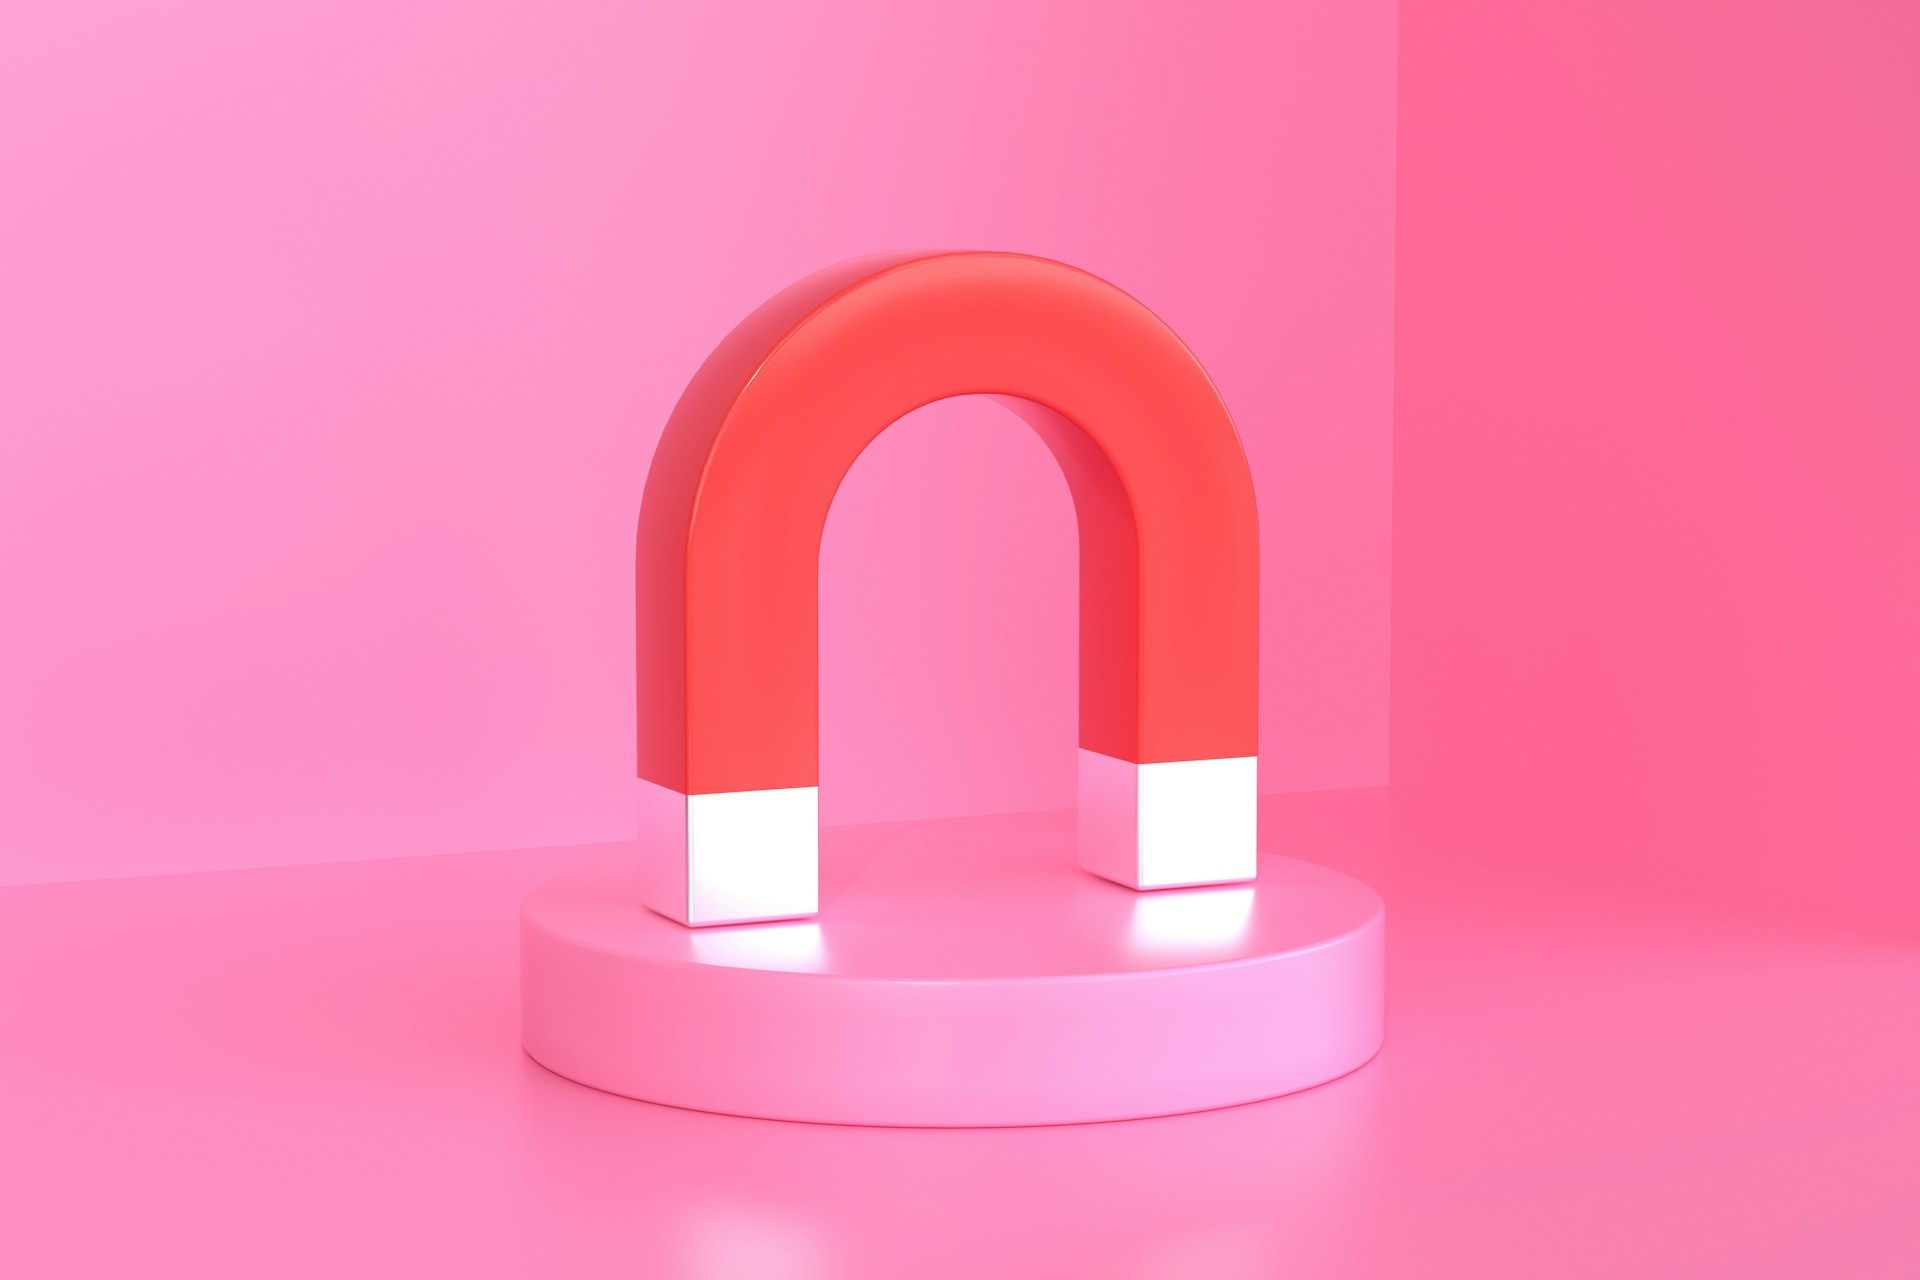 A pink magnet on a pink background